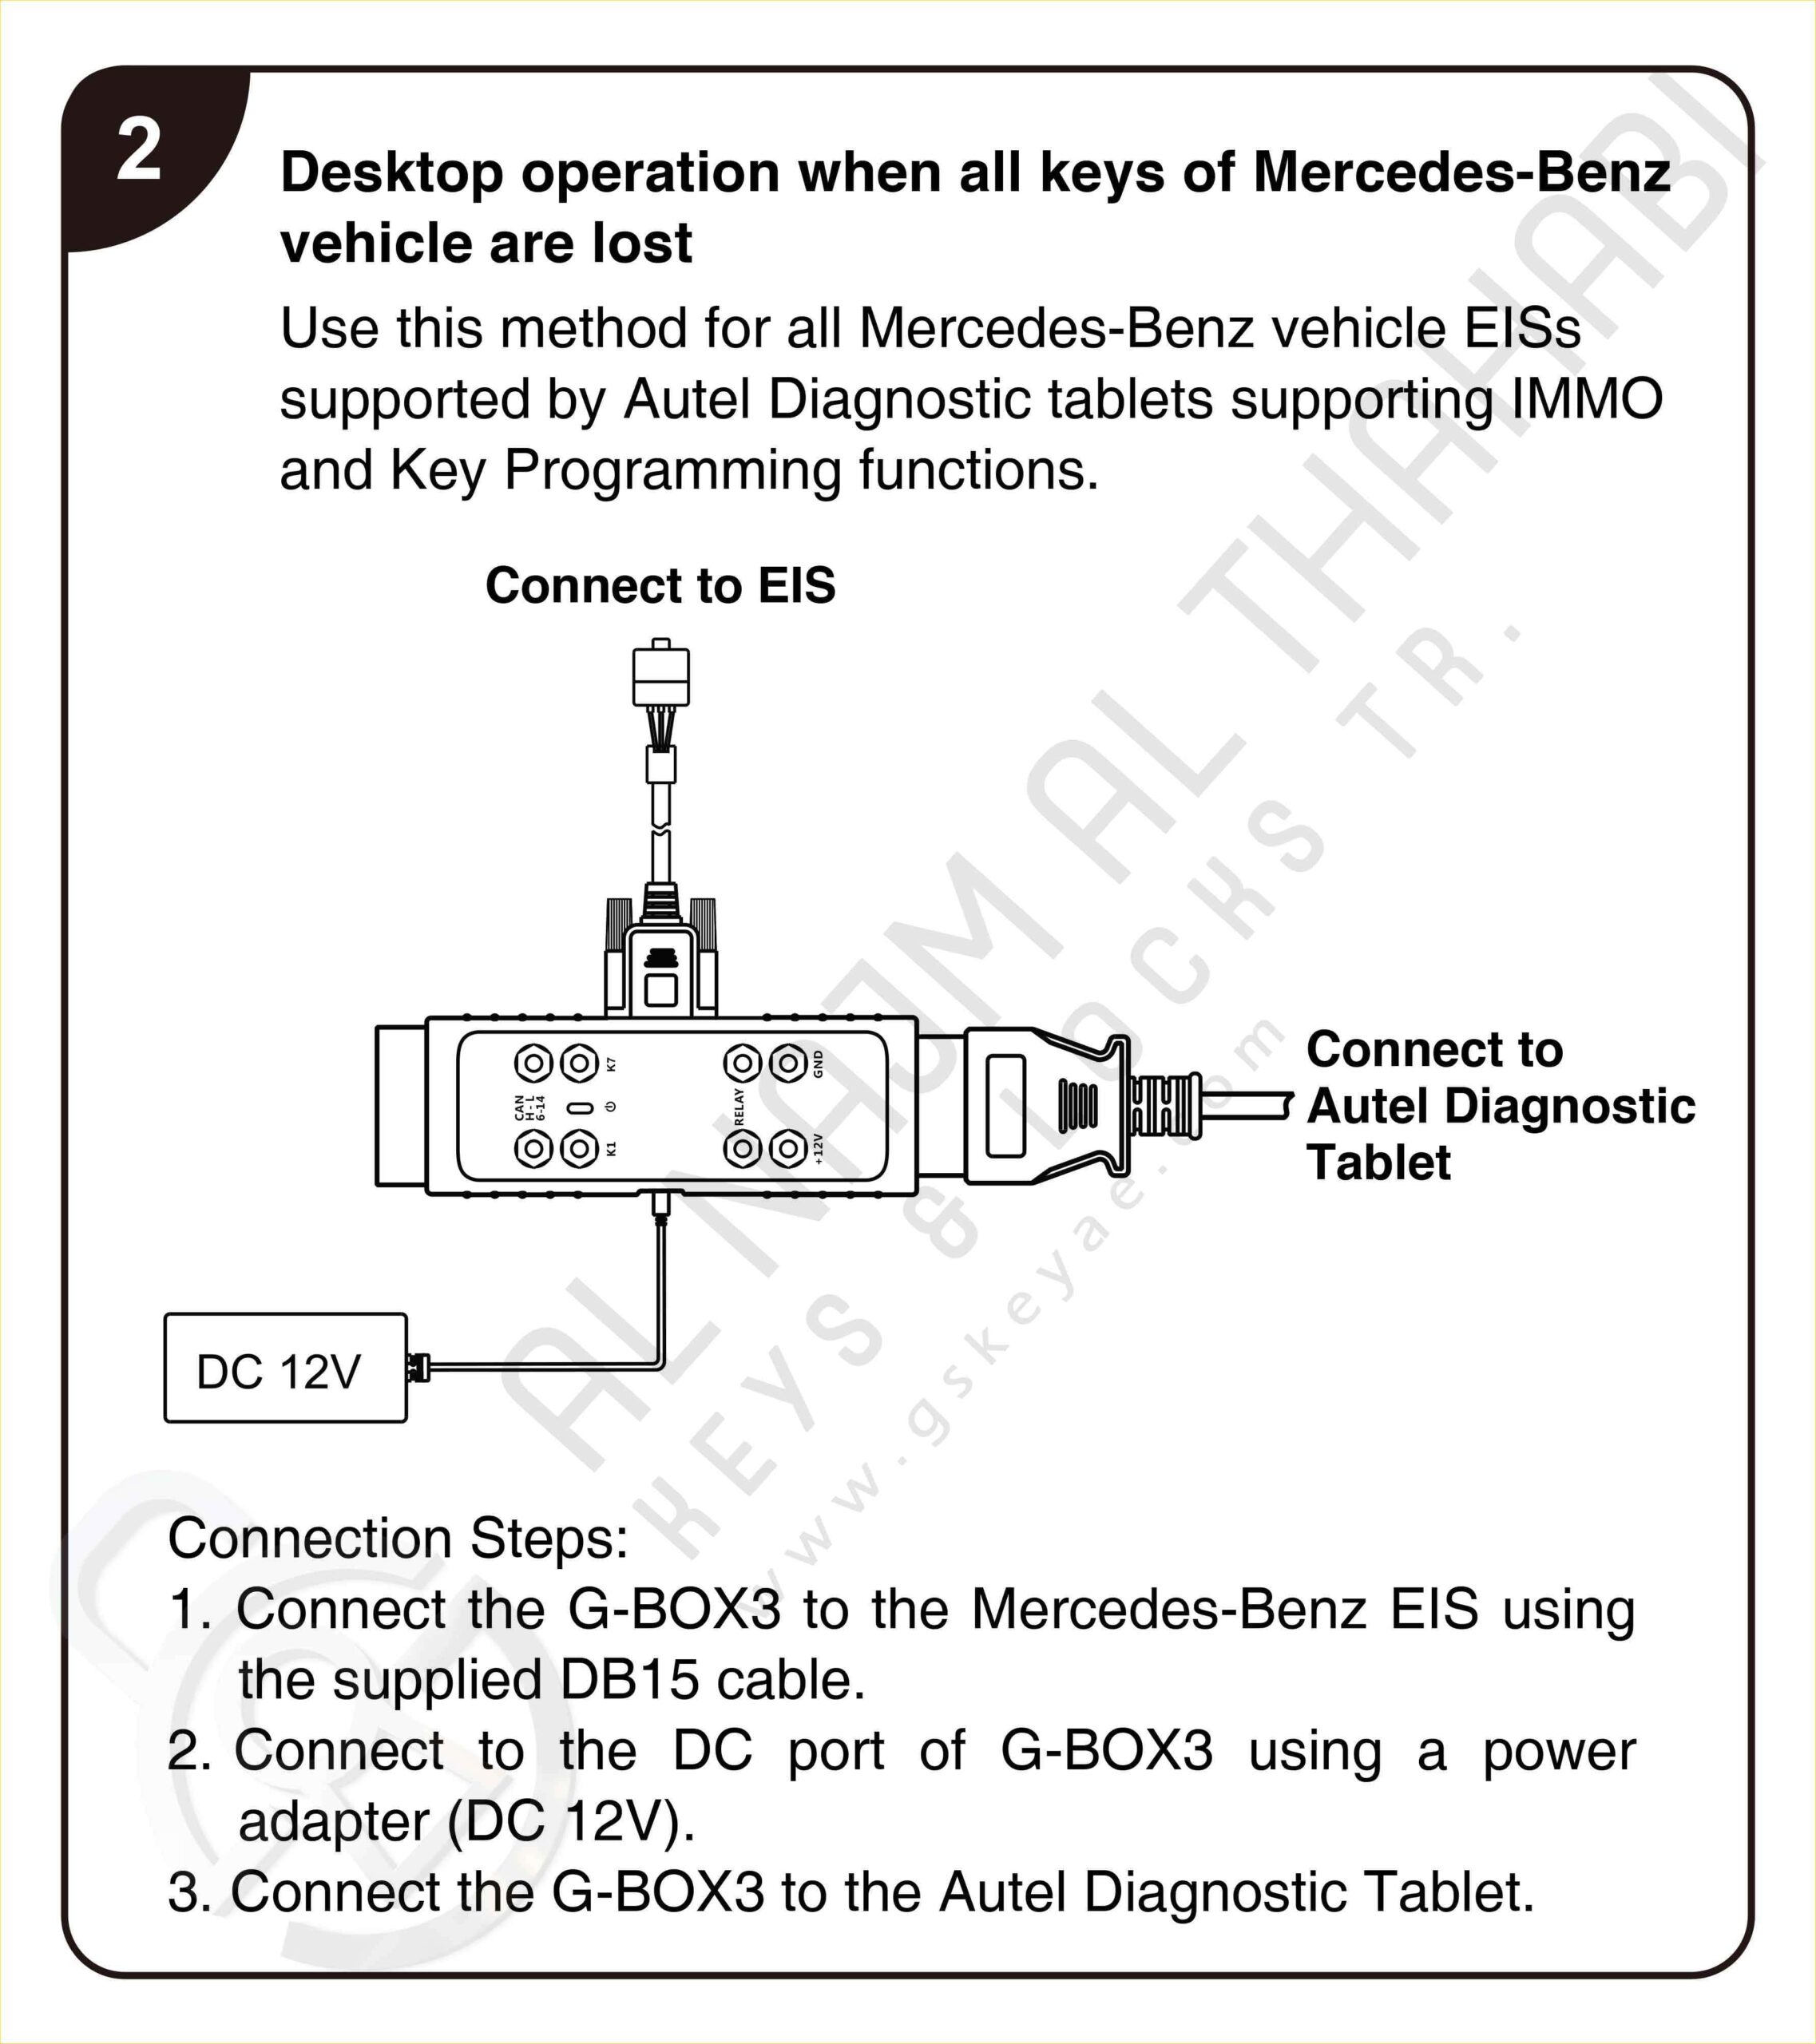 Desktop operation when all keys of Mercedes-Benz vehicle are lost: